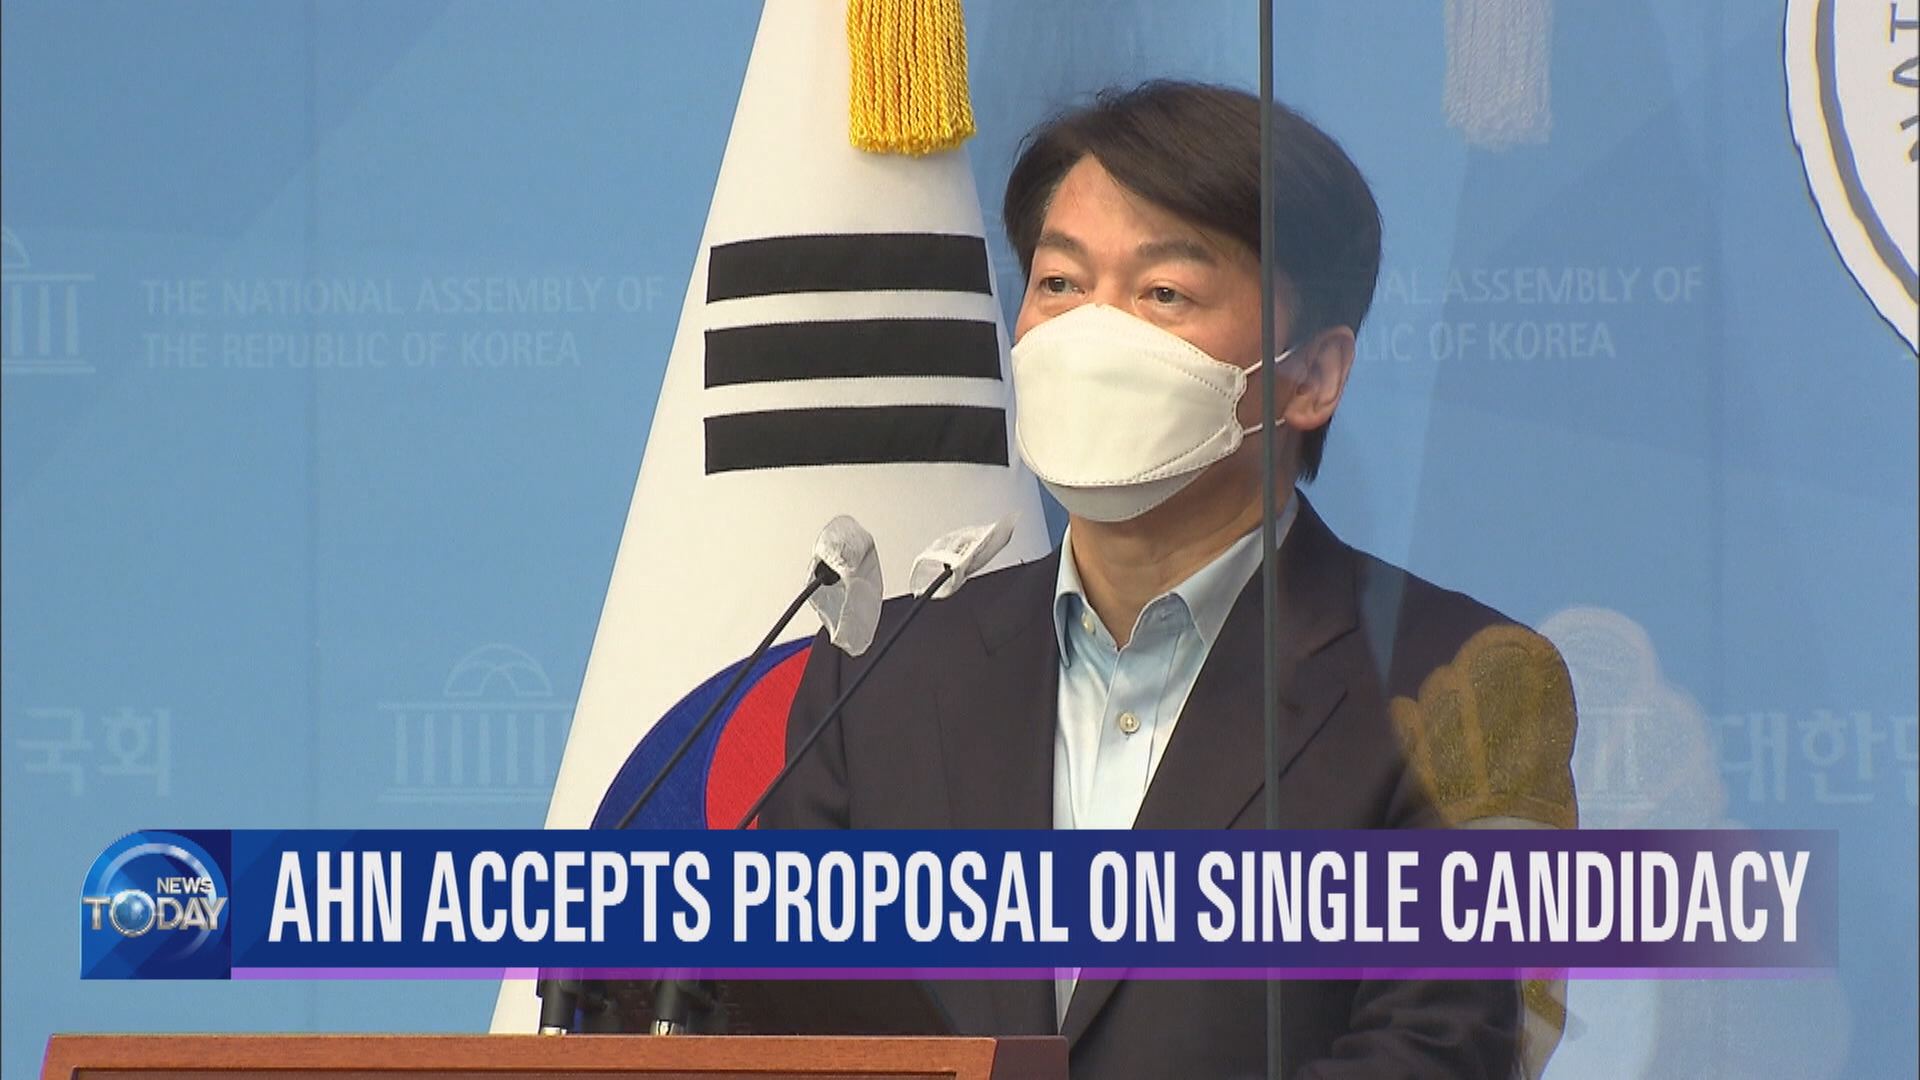 AHN ACCEPTS PROPOSAL ON SINGLE CANDIDACY